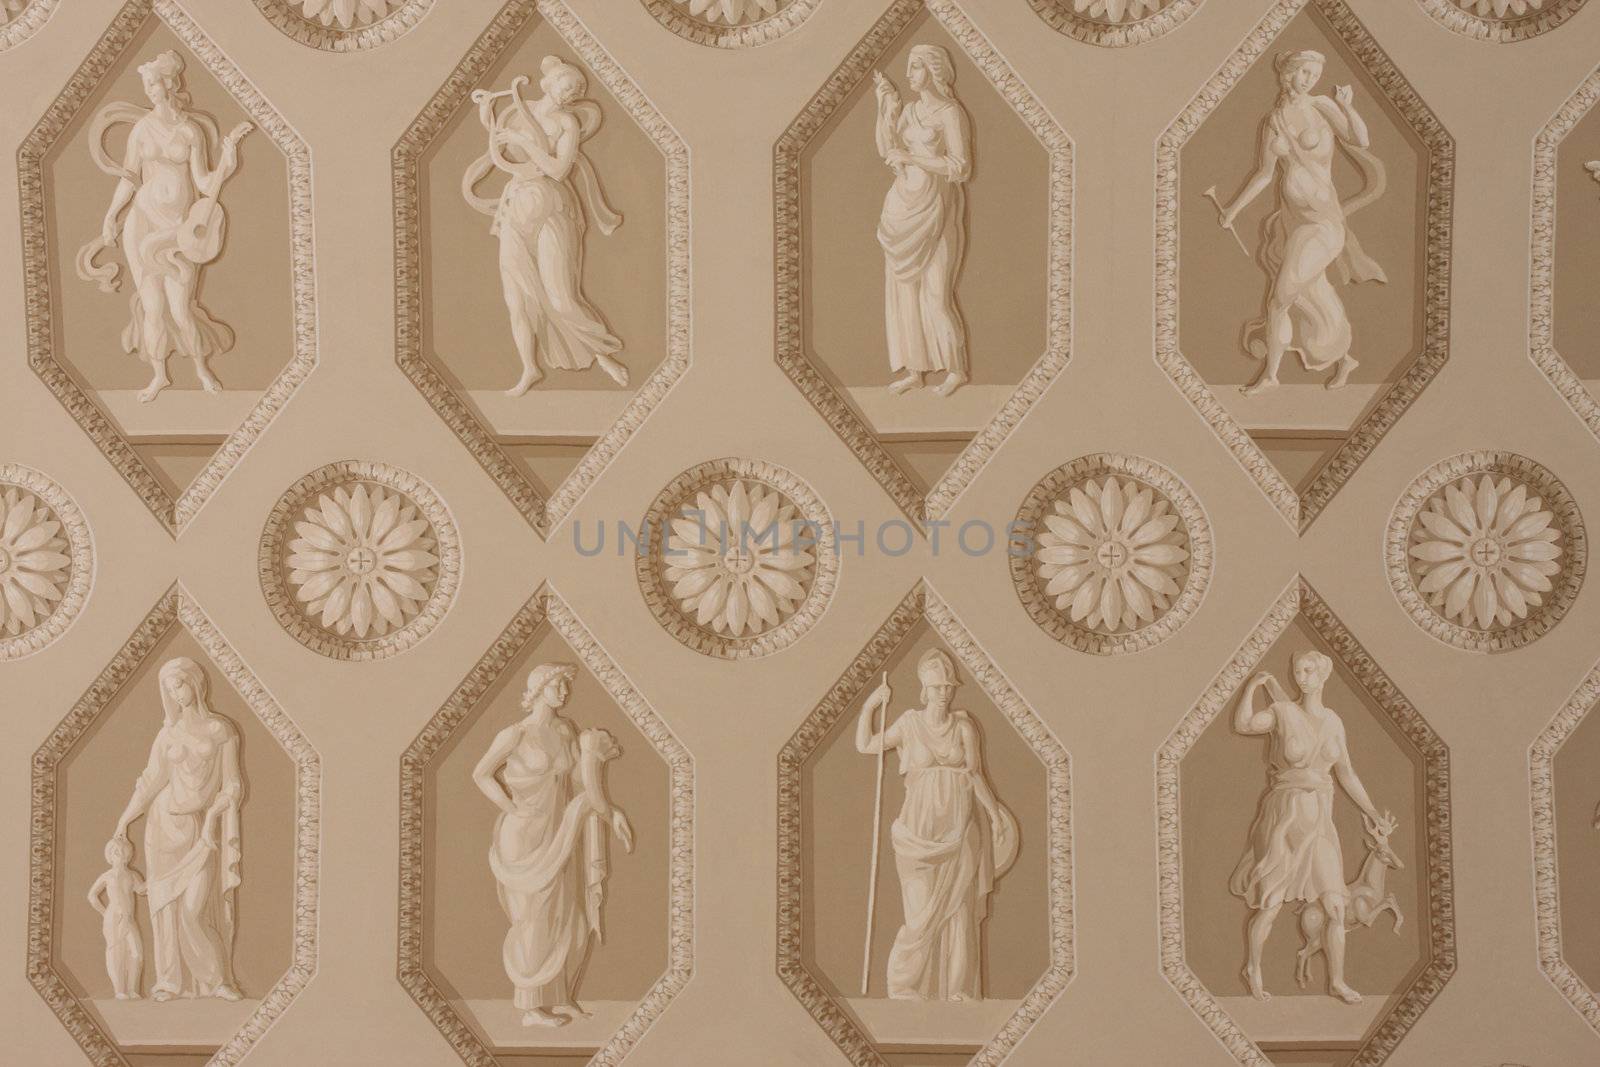 Ornament, ceiling, architecture, art, figures, people, background, structure